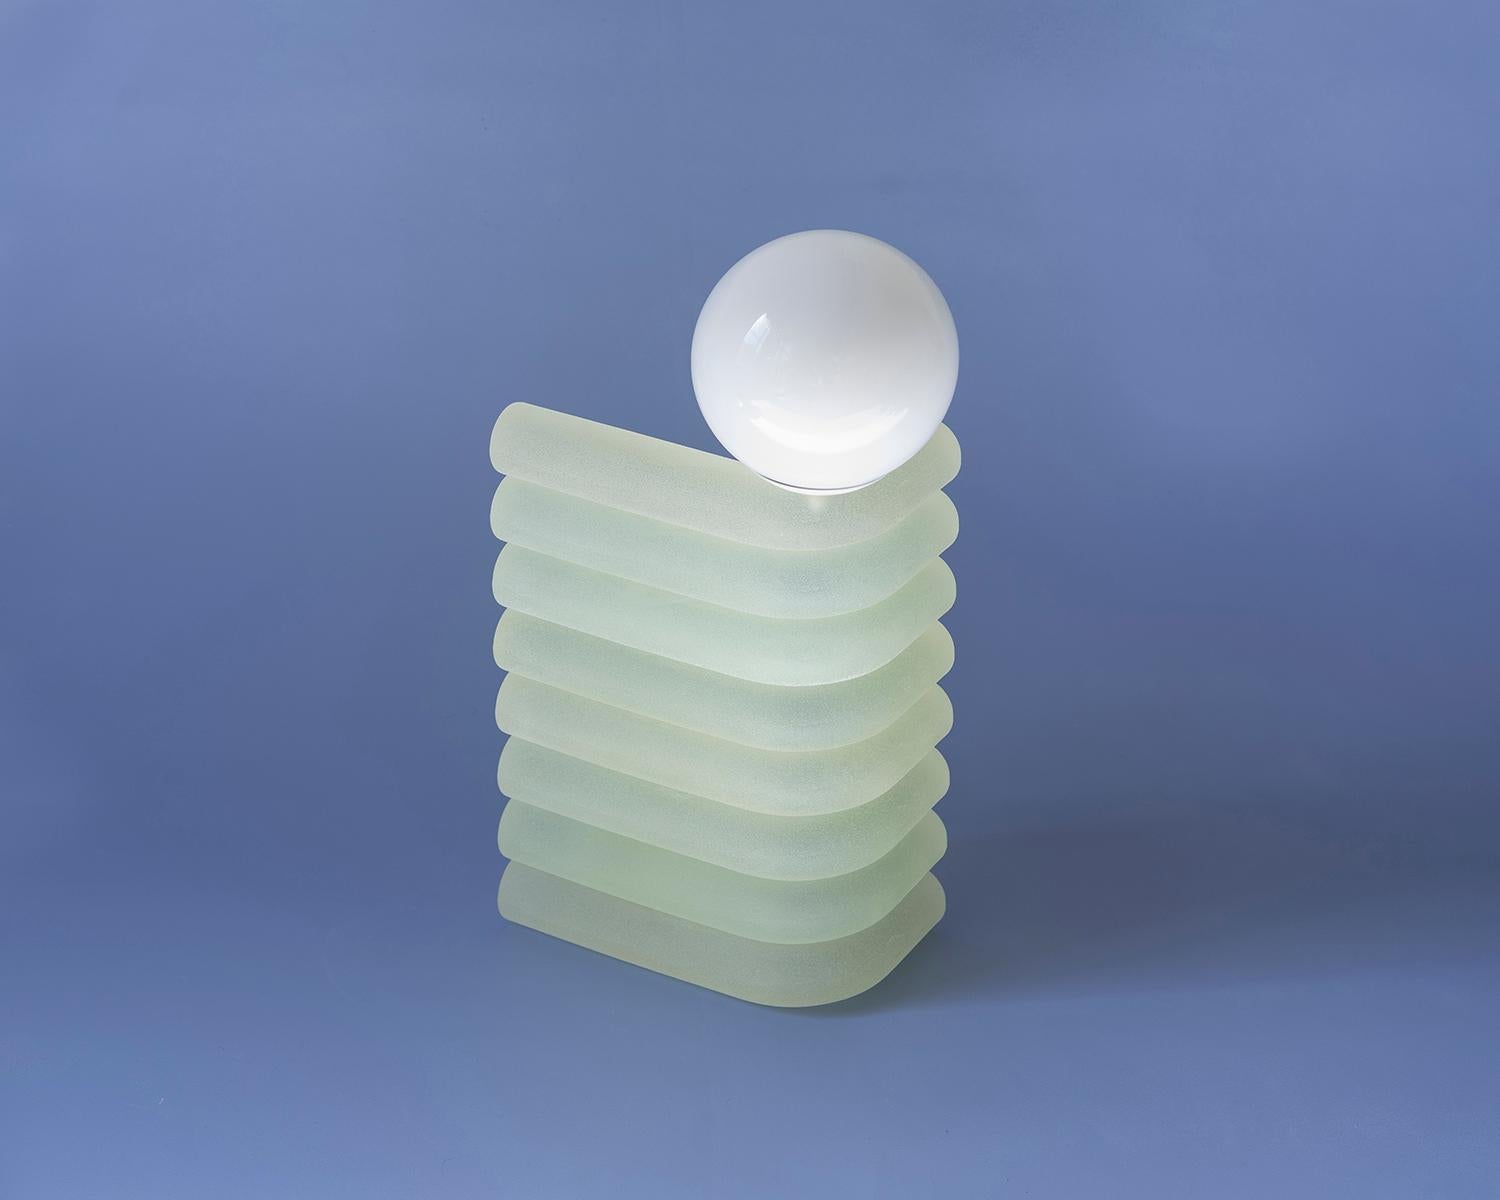 Elio lamps are stacks of translucent, tubular cast-resin that create a diffused glow, with frosted sugar jellies as a visual reference. The lamp's singular bend is a small ode to Eileen Gray’s Bibendum lounge. Integrated with smart wifi devices,